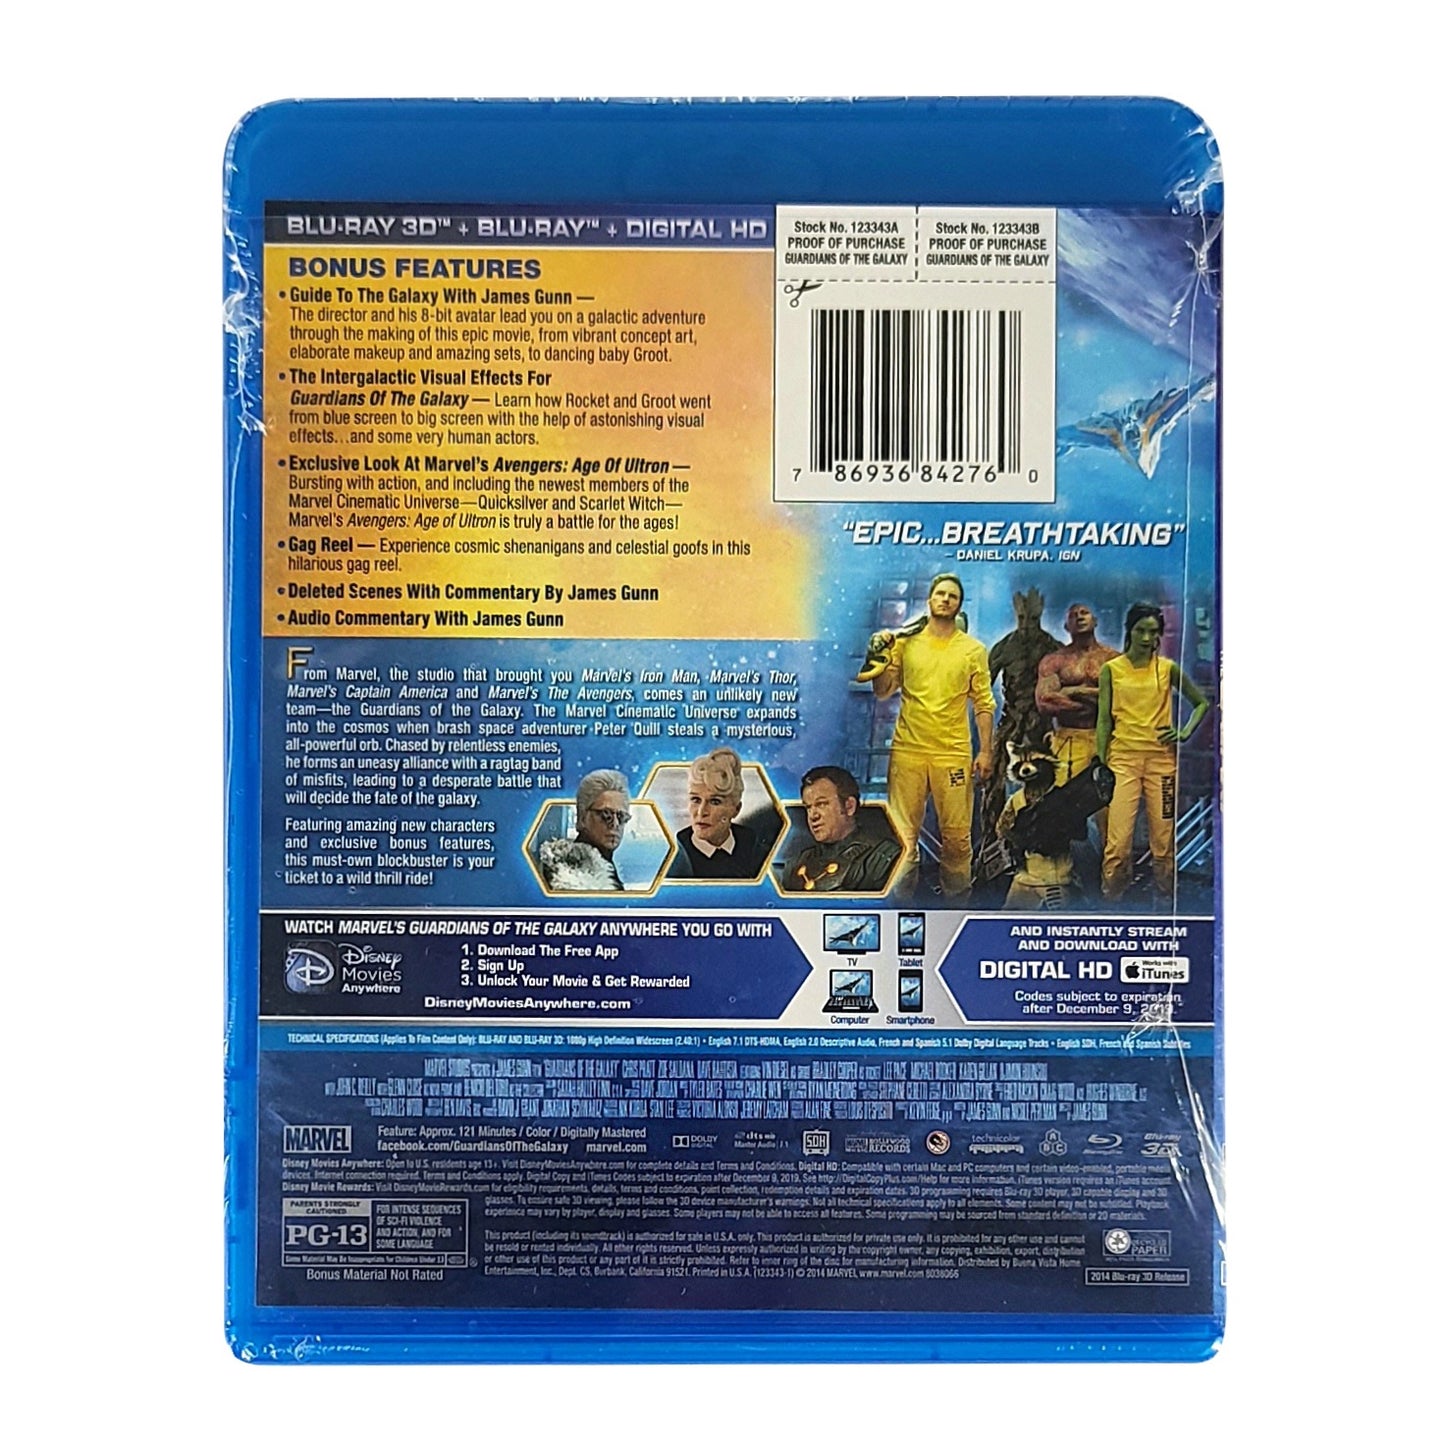 'Guardians Of The Galaxy' Blu-ray